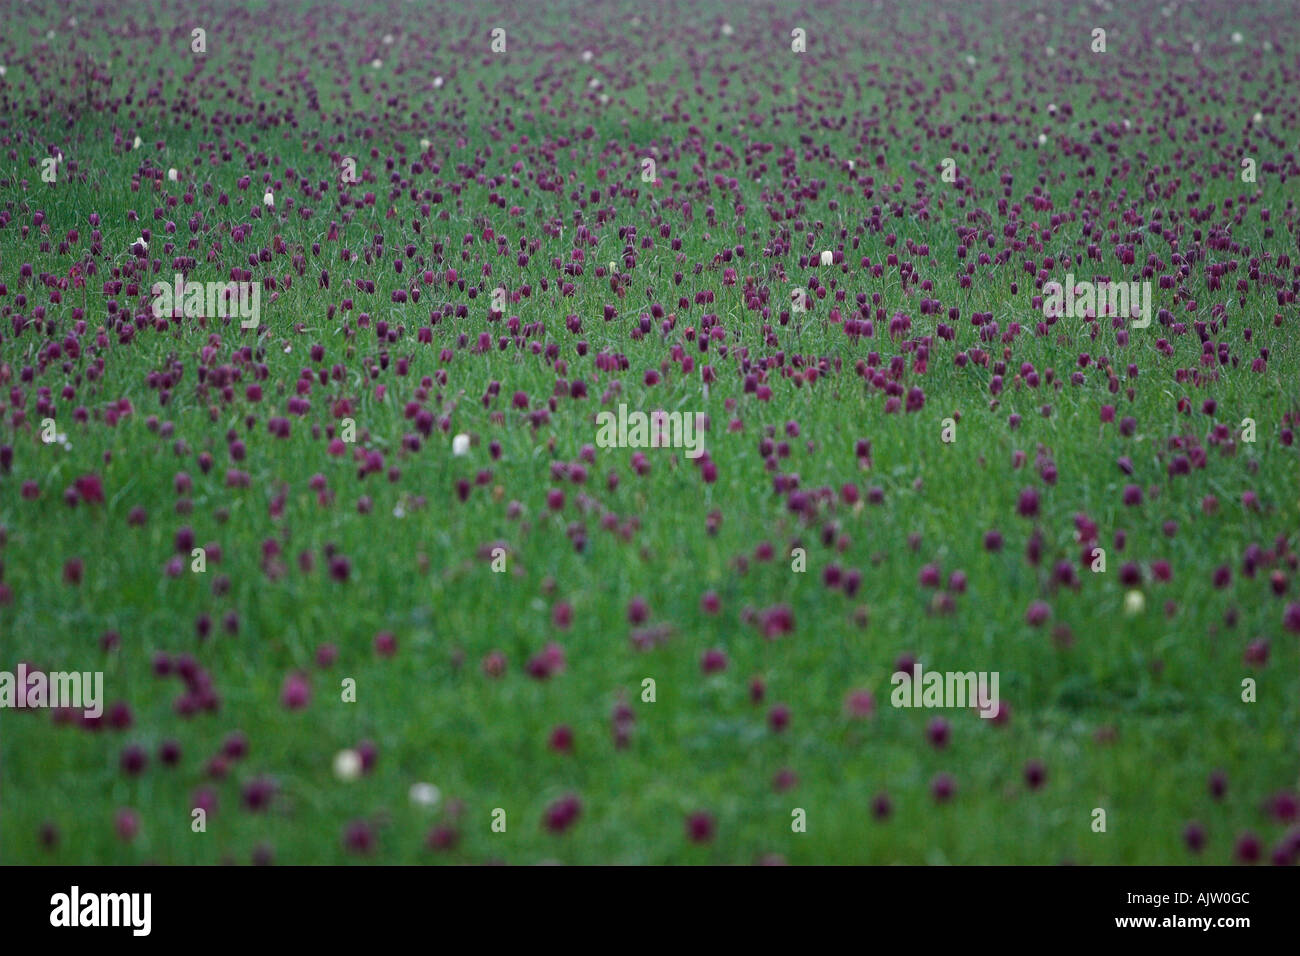 'Snakes Head' Fritillaries, 'Magdalen College', Oxford, England, UK, colourful [flower meadow] of purple and white wild flowers Stock Photo